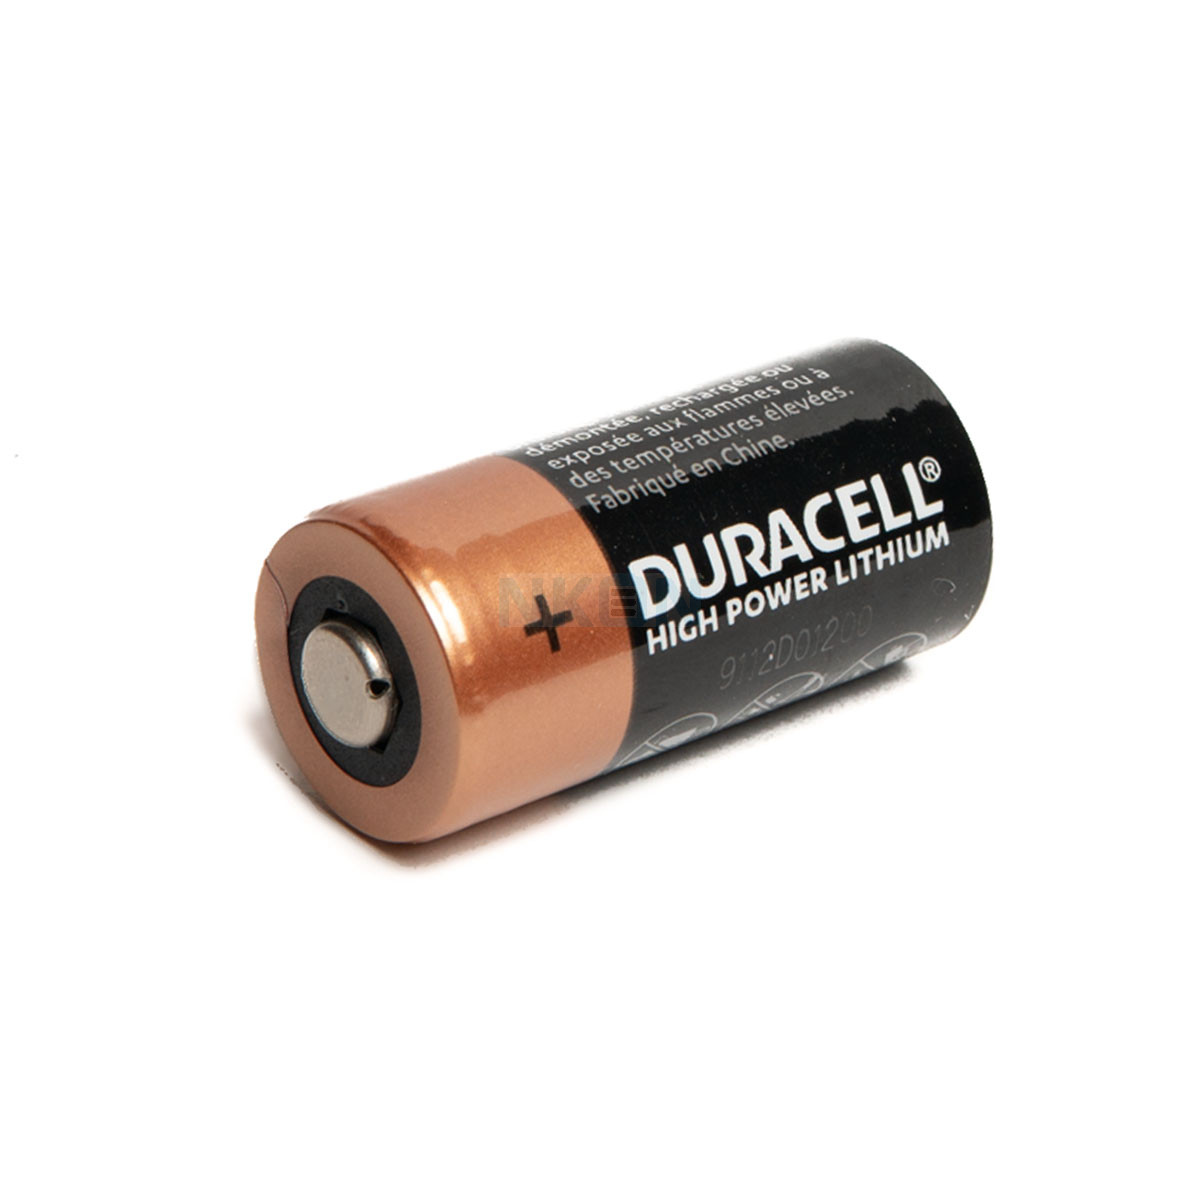 Duracell CR123A 3V Lithium Battery, 6 Count Pack, 123 3 Volt High Power Lithium  Battery, Long-Lasting for Home Safety and Security Devices, High-Intensity  Flashlights, and Home Automation